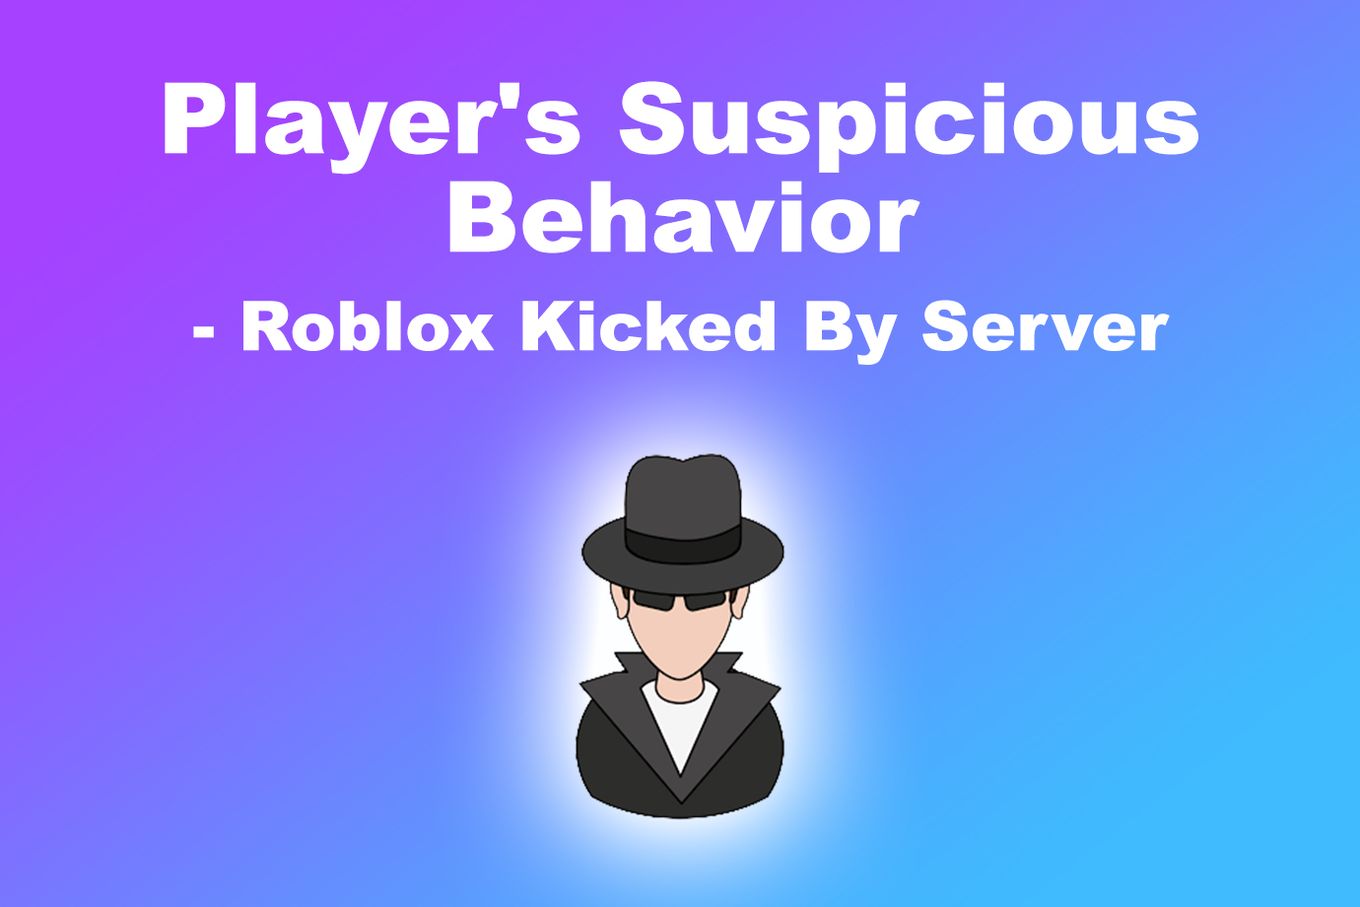 Disconnection Error - Roblox Kicked by Server